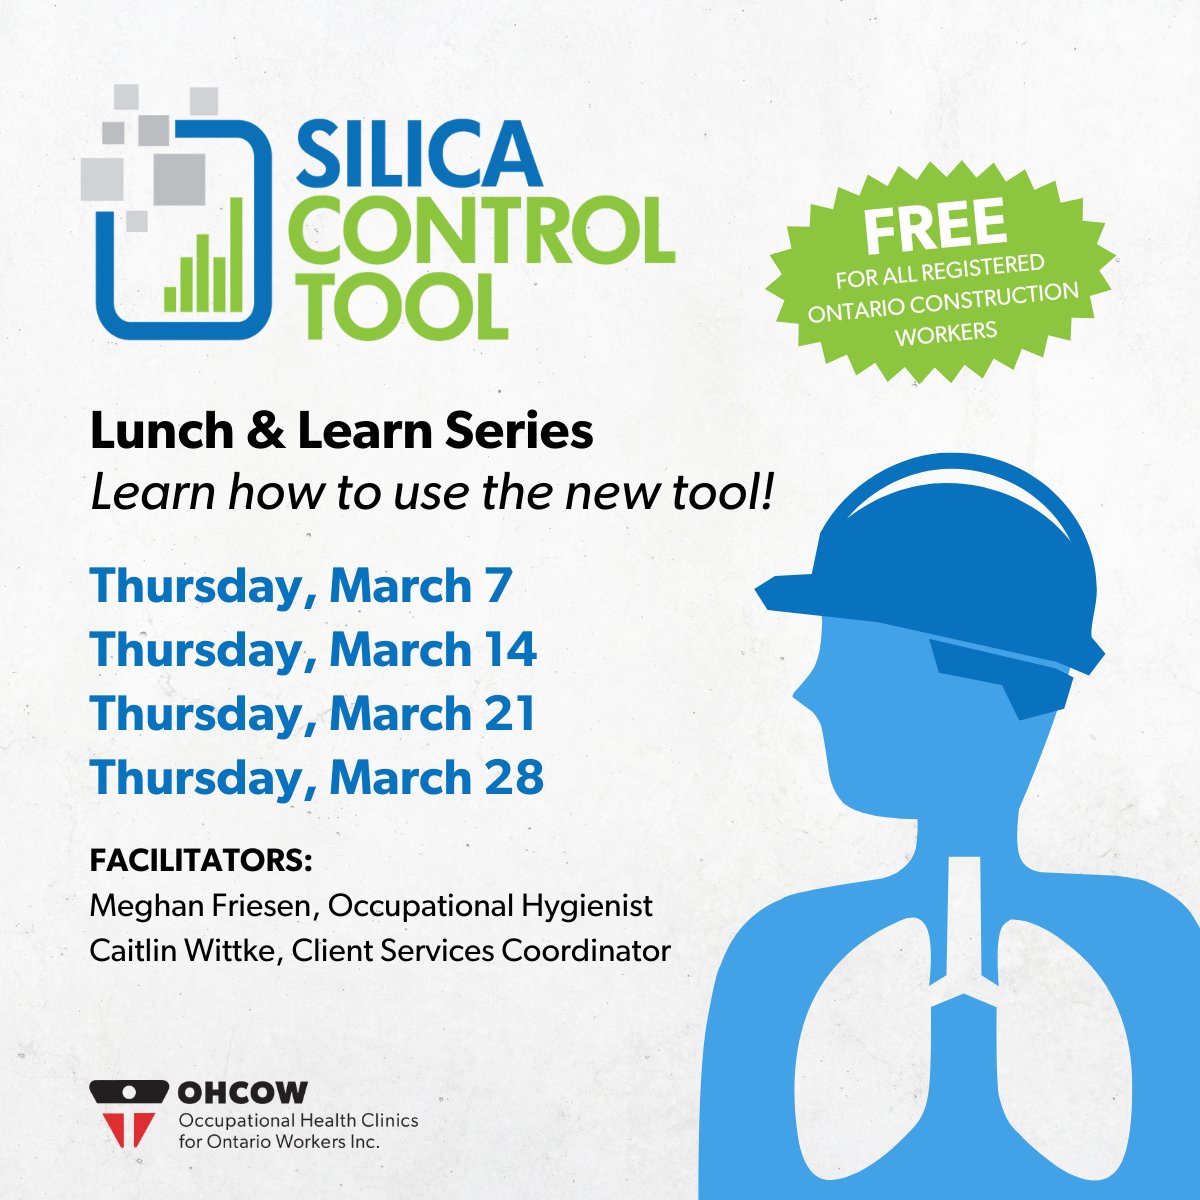 ICYMI: We are hosting free Lunch & Learns every Thursday in March from 11:30-12:30 (EST), so you can get up to speed on the new Silica Control Tool, and start taking action to reduce risk and protect workers. Learn more and register here: ohcow.on.ca/ohcow-events/s…